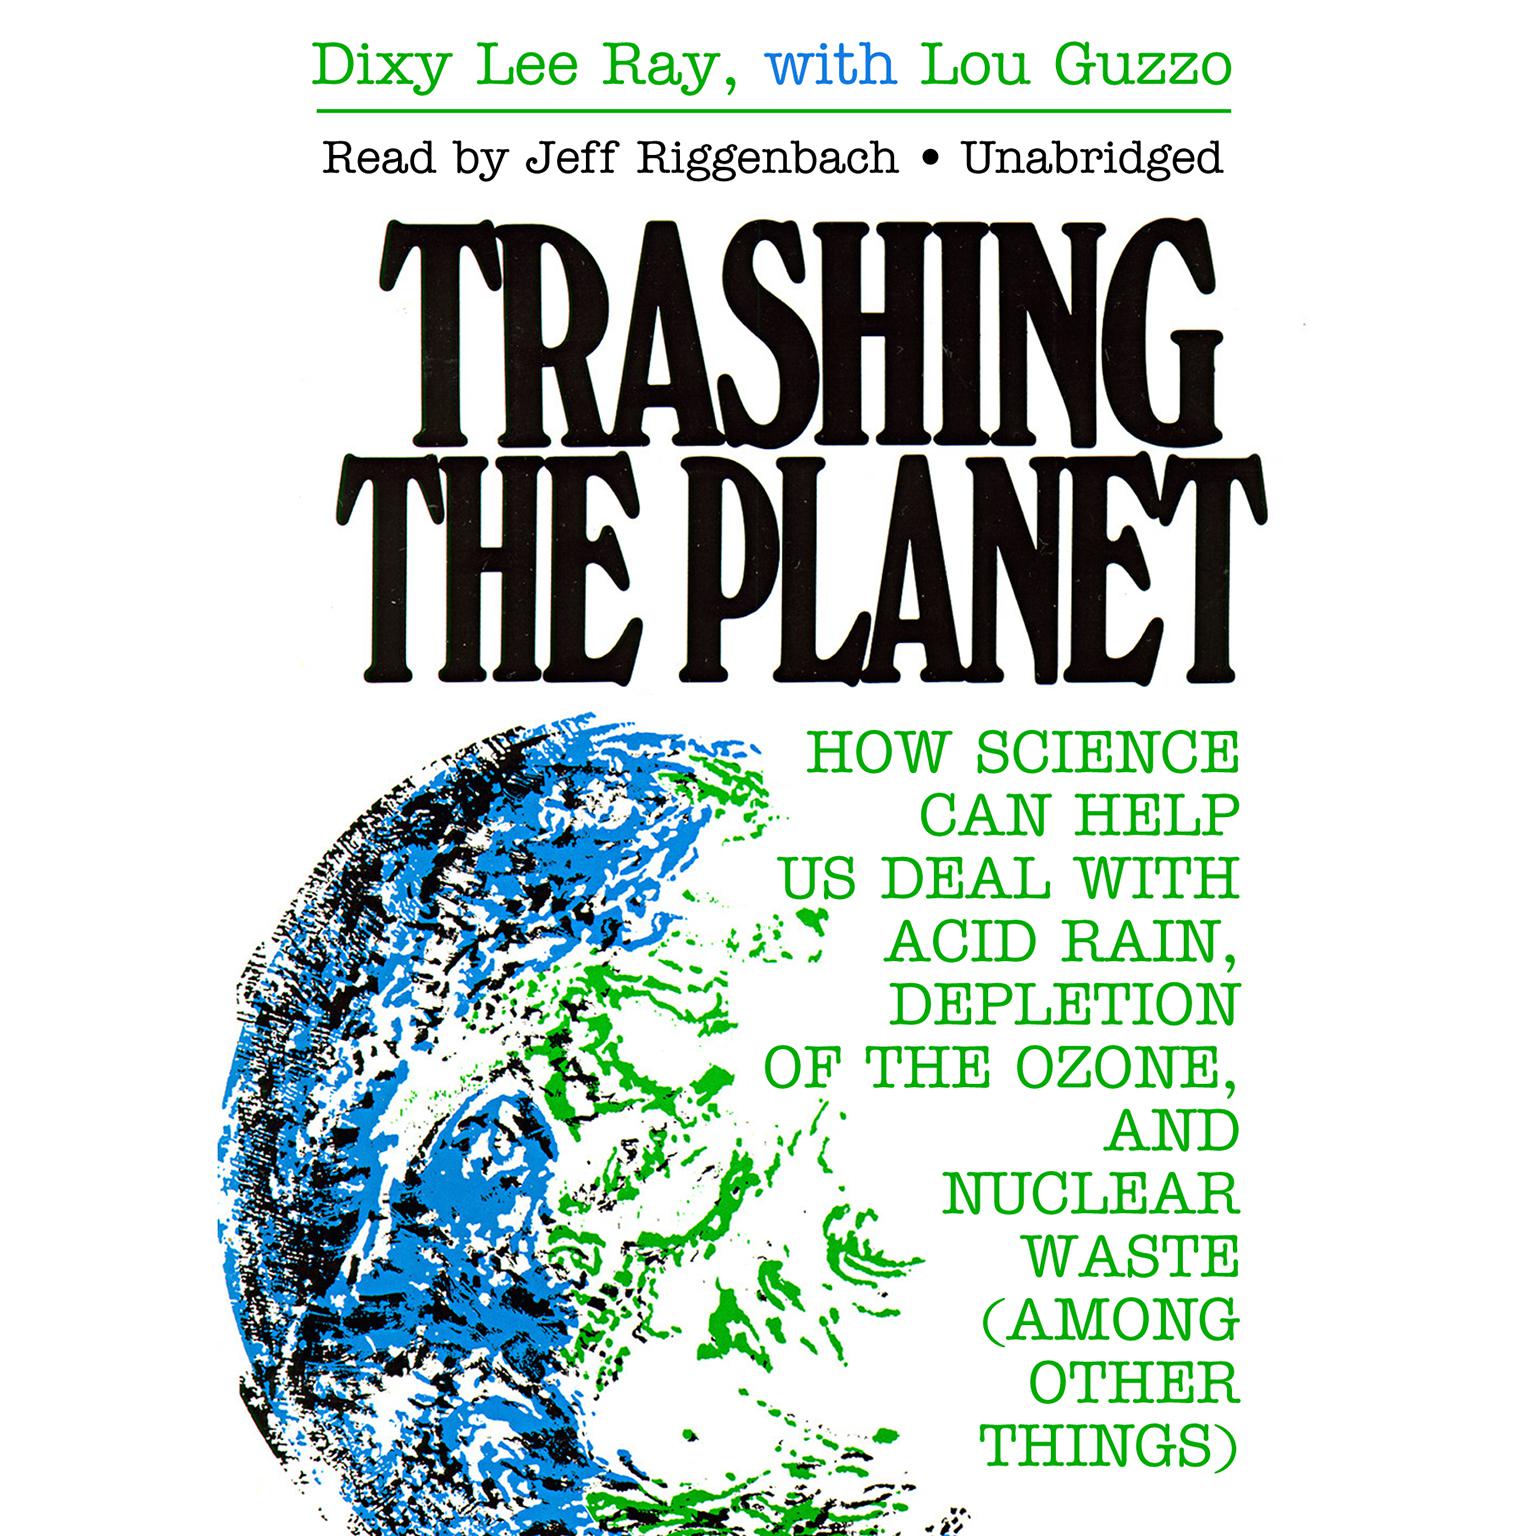 Trashing the Planet: How Science Can Help Us Deal with Acid Rain, Depletion of the Ozone, and Nuclear Waste (among Other Things) Audiobook, by Dixy Lee Ray